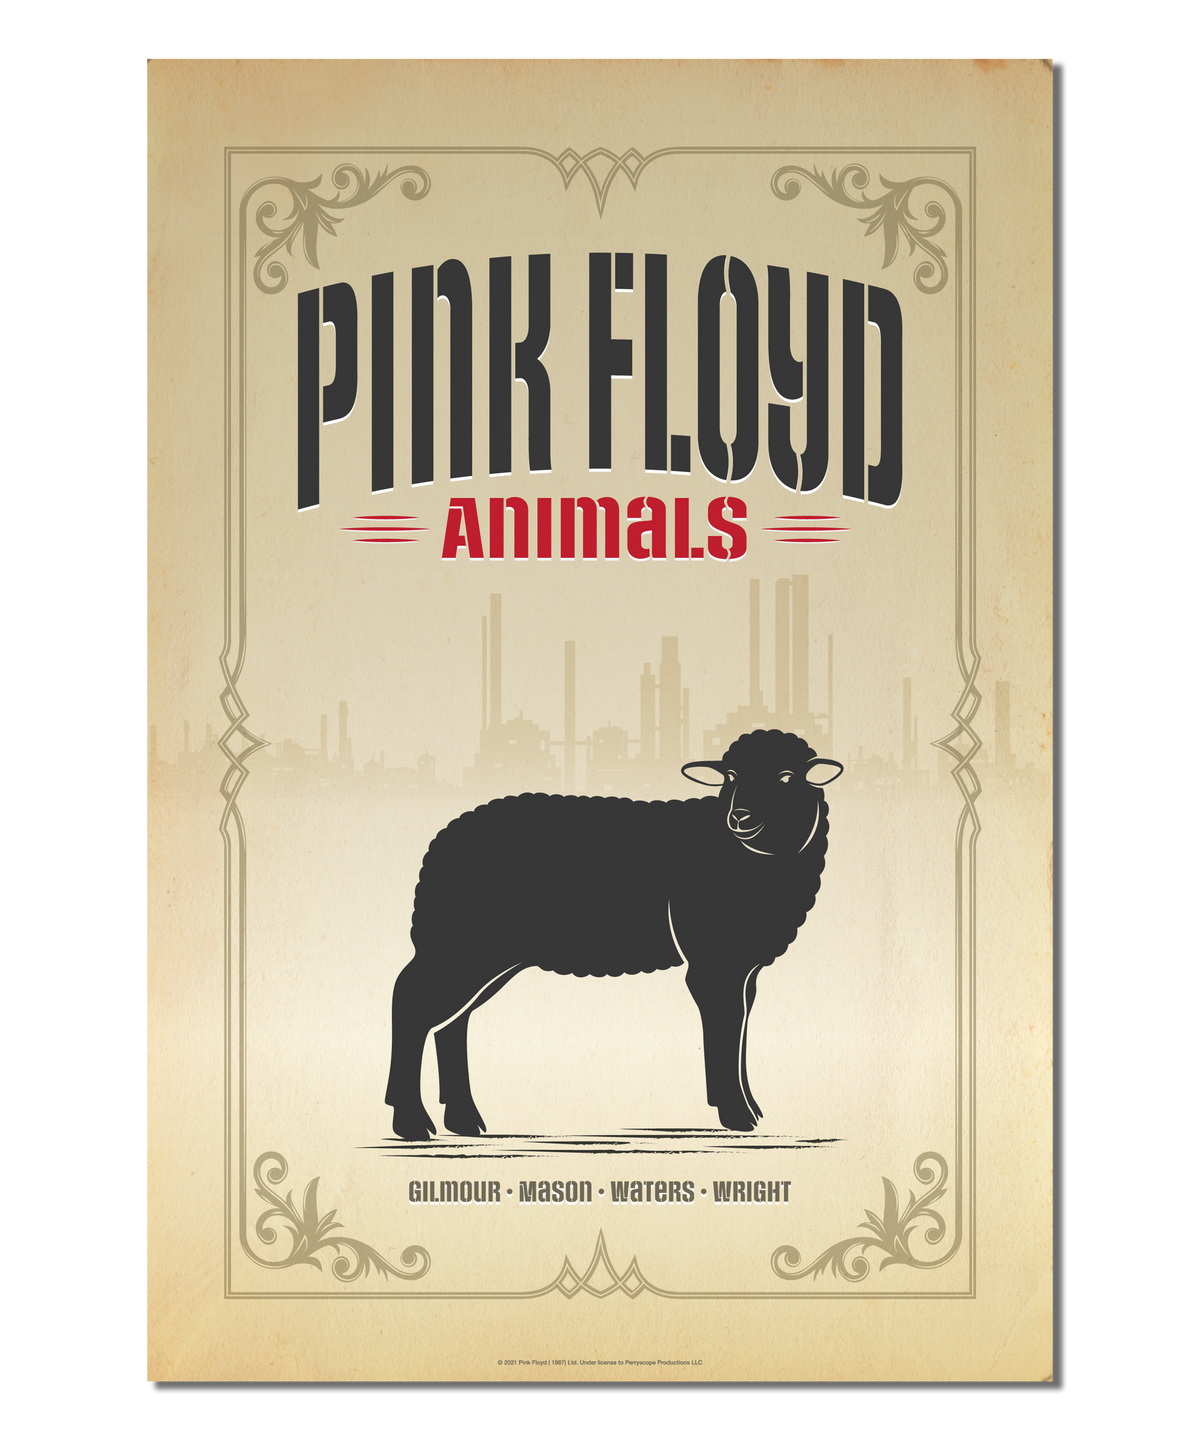 Pink Floyd Print Inspired by the album, "Animals: "Sheep" Version